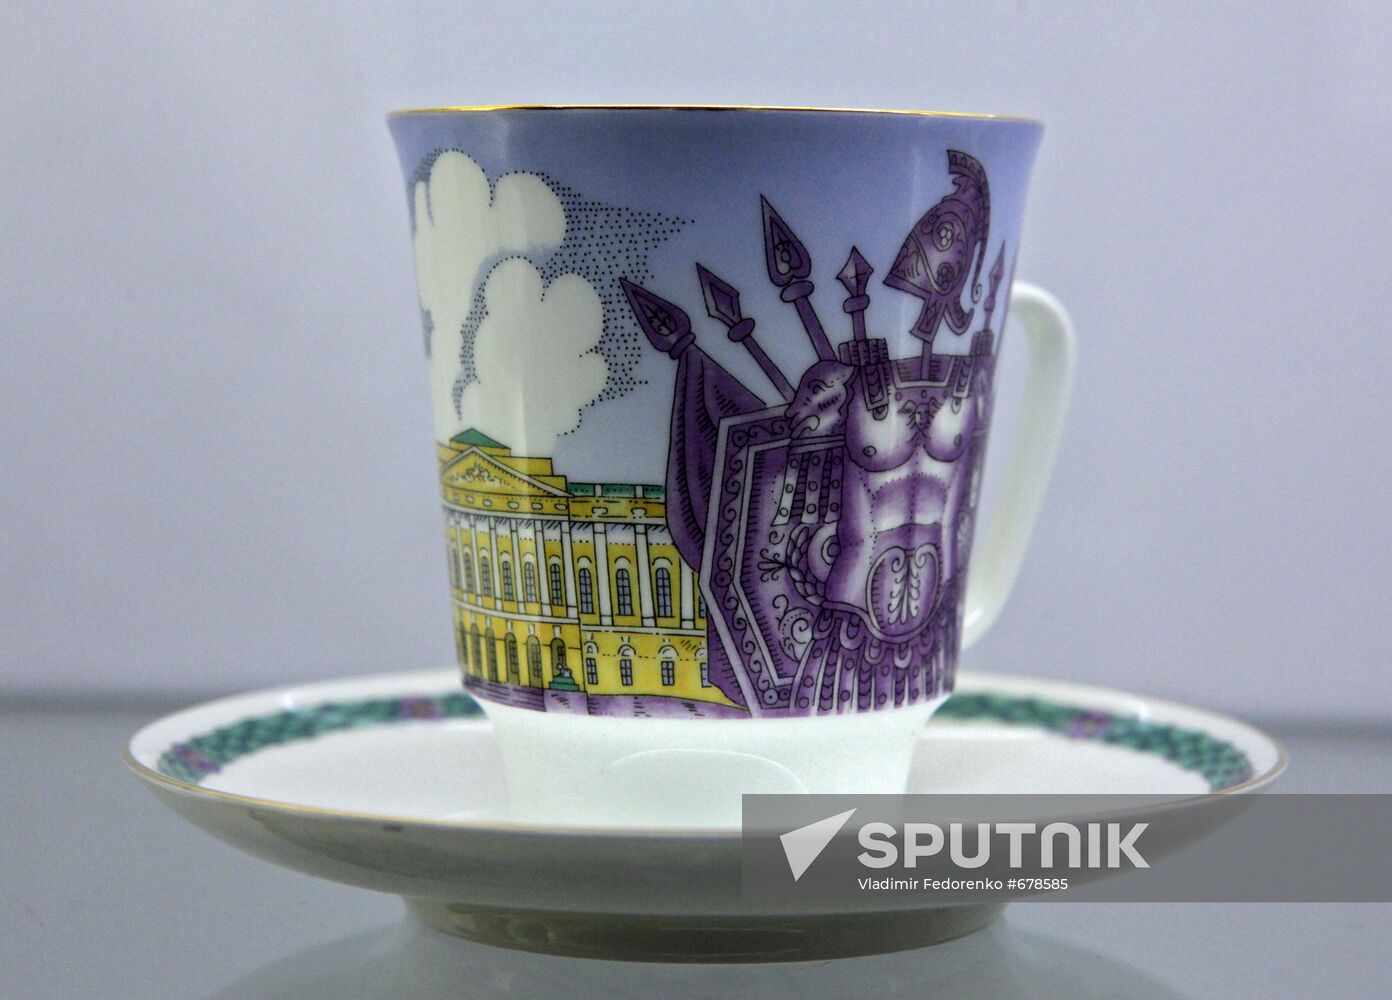 Production of Imperial Porcelain Manufactory in St. Petersburg